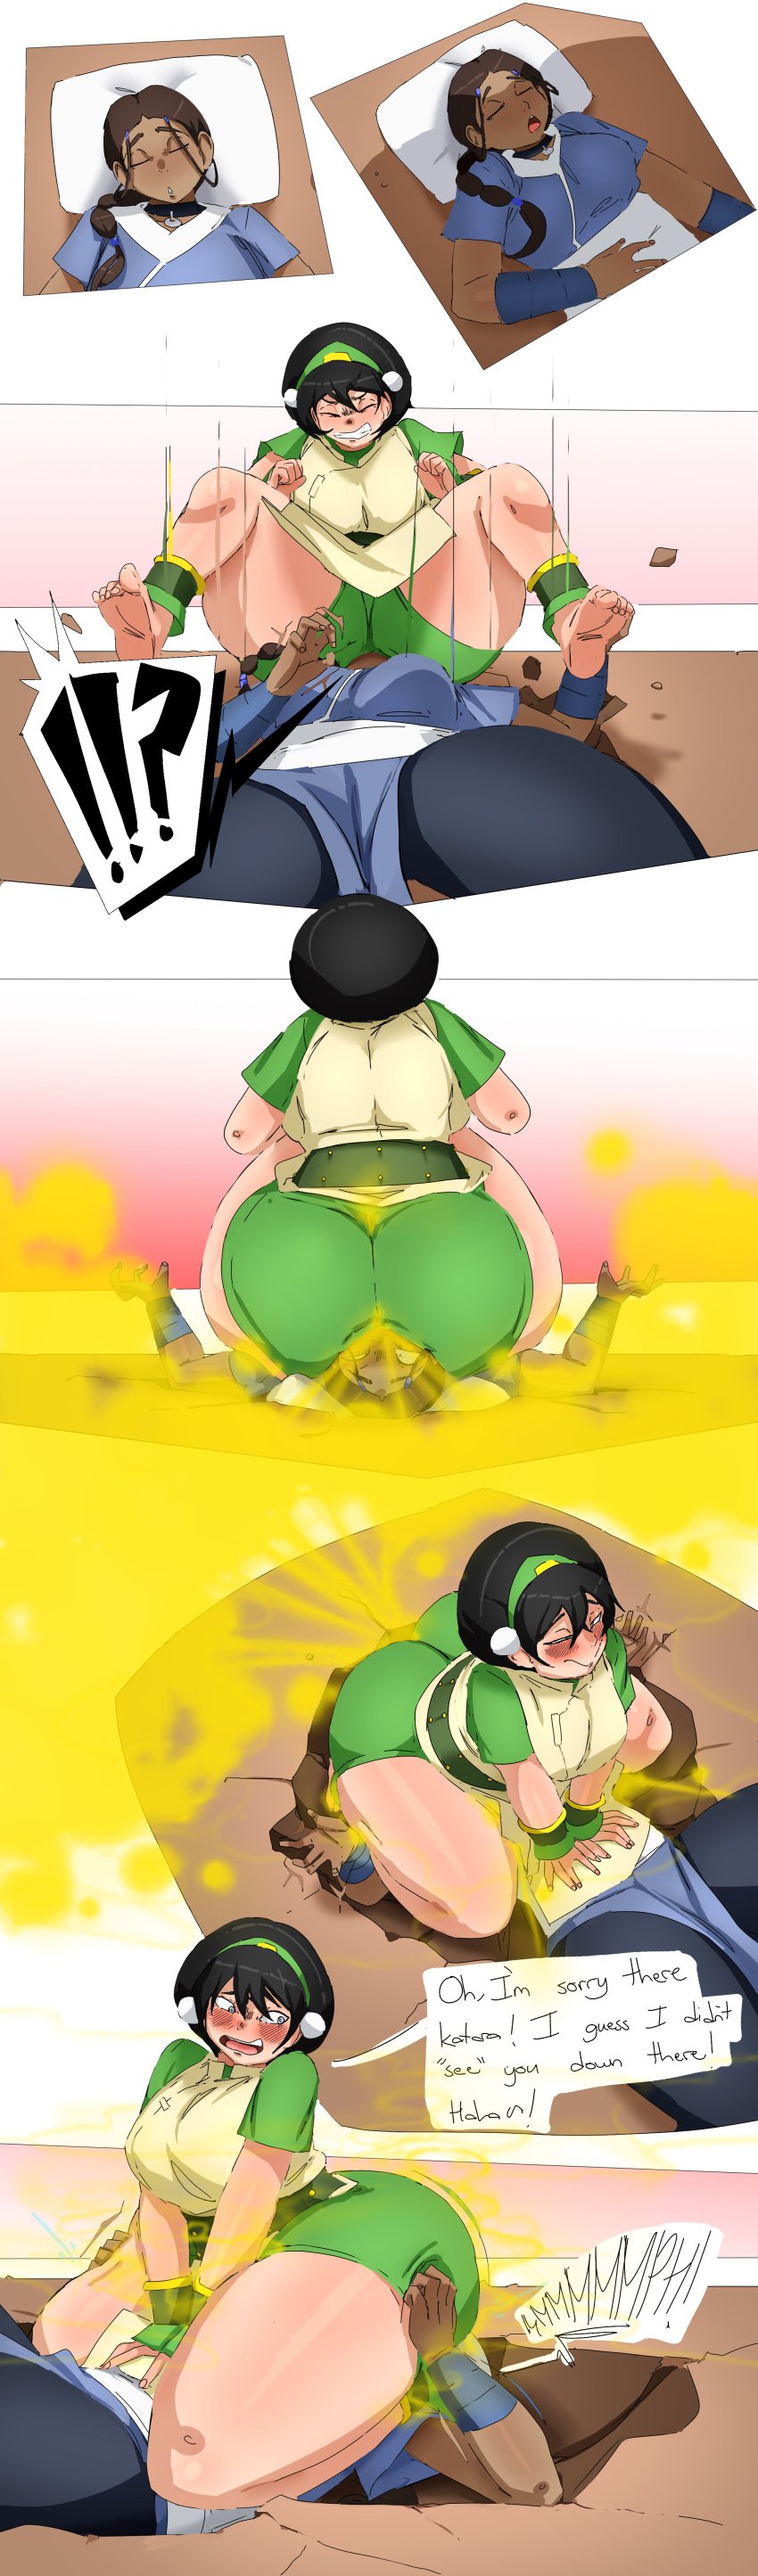 !!? 2girls ass ass_grab ass_on_face avatar_legends avatar_the_last_airbender big_ass big_butt black_hair blind blush brown_hair closed_eyes dark-skinned_female earth_kingdom english_text facesitting fart fart_cloud fart_fetish farting farting_in_face female green_shorts grey_eyes hairband katara laying_down laying_on_back lazei looking_back nickelodeon open_mouth pillow rear_view shaded shorts sleeping smile text thick_thighs toph_bei_fong viewed_from_behind water_tribe